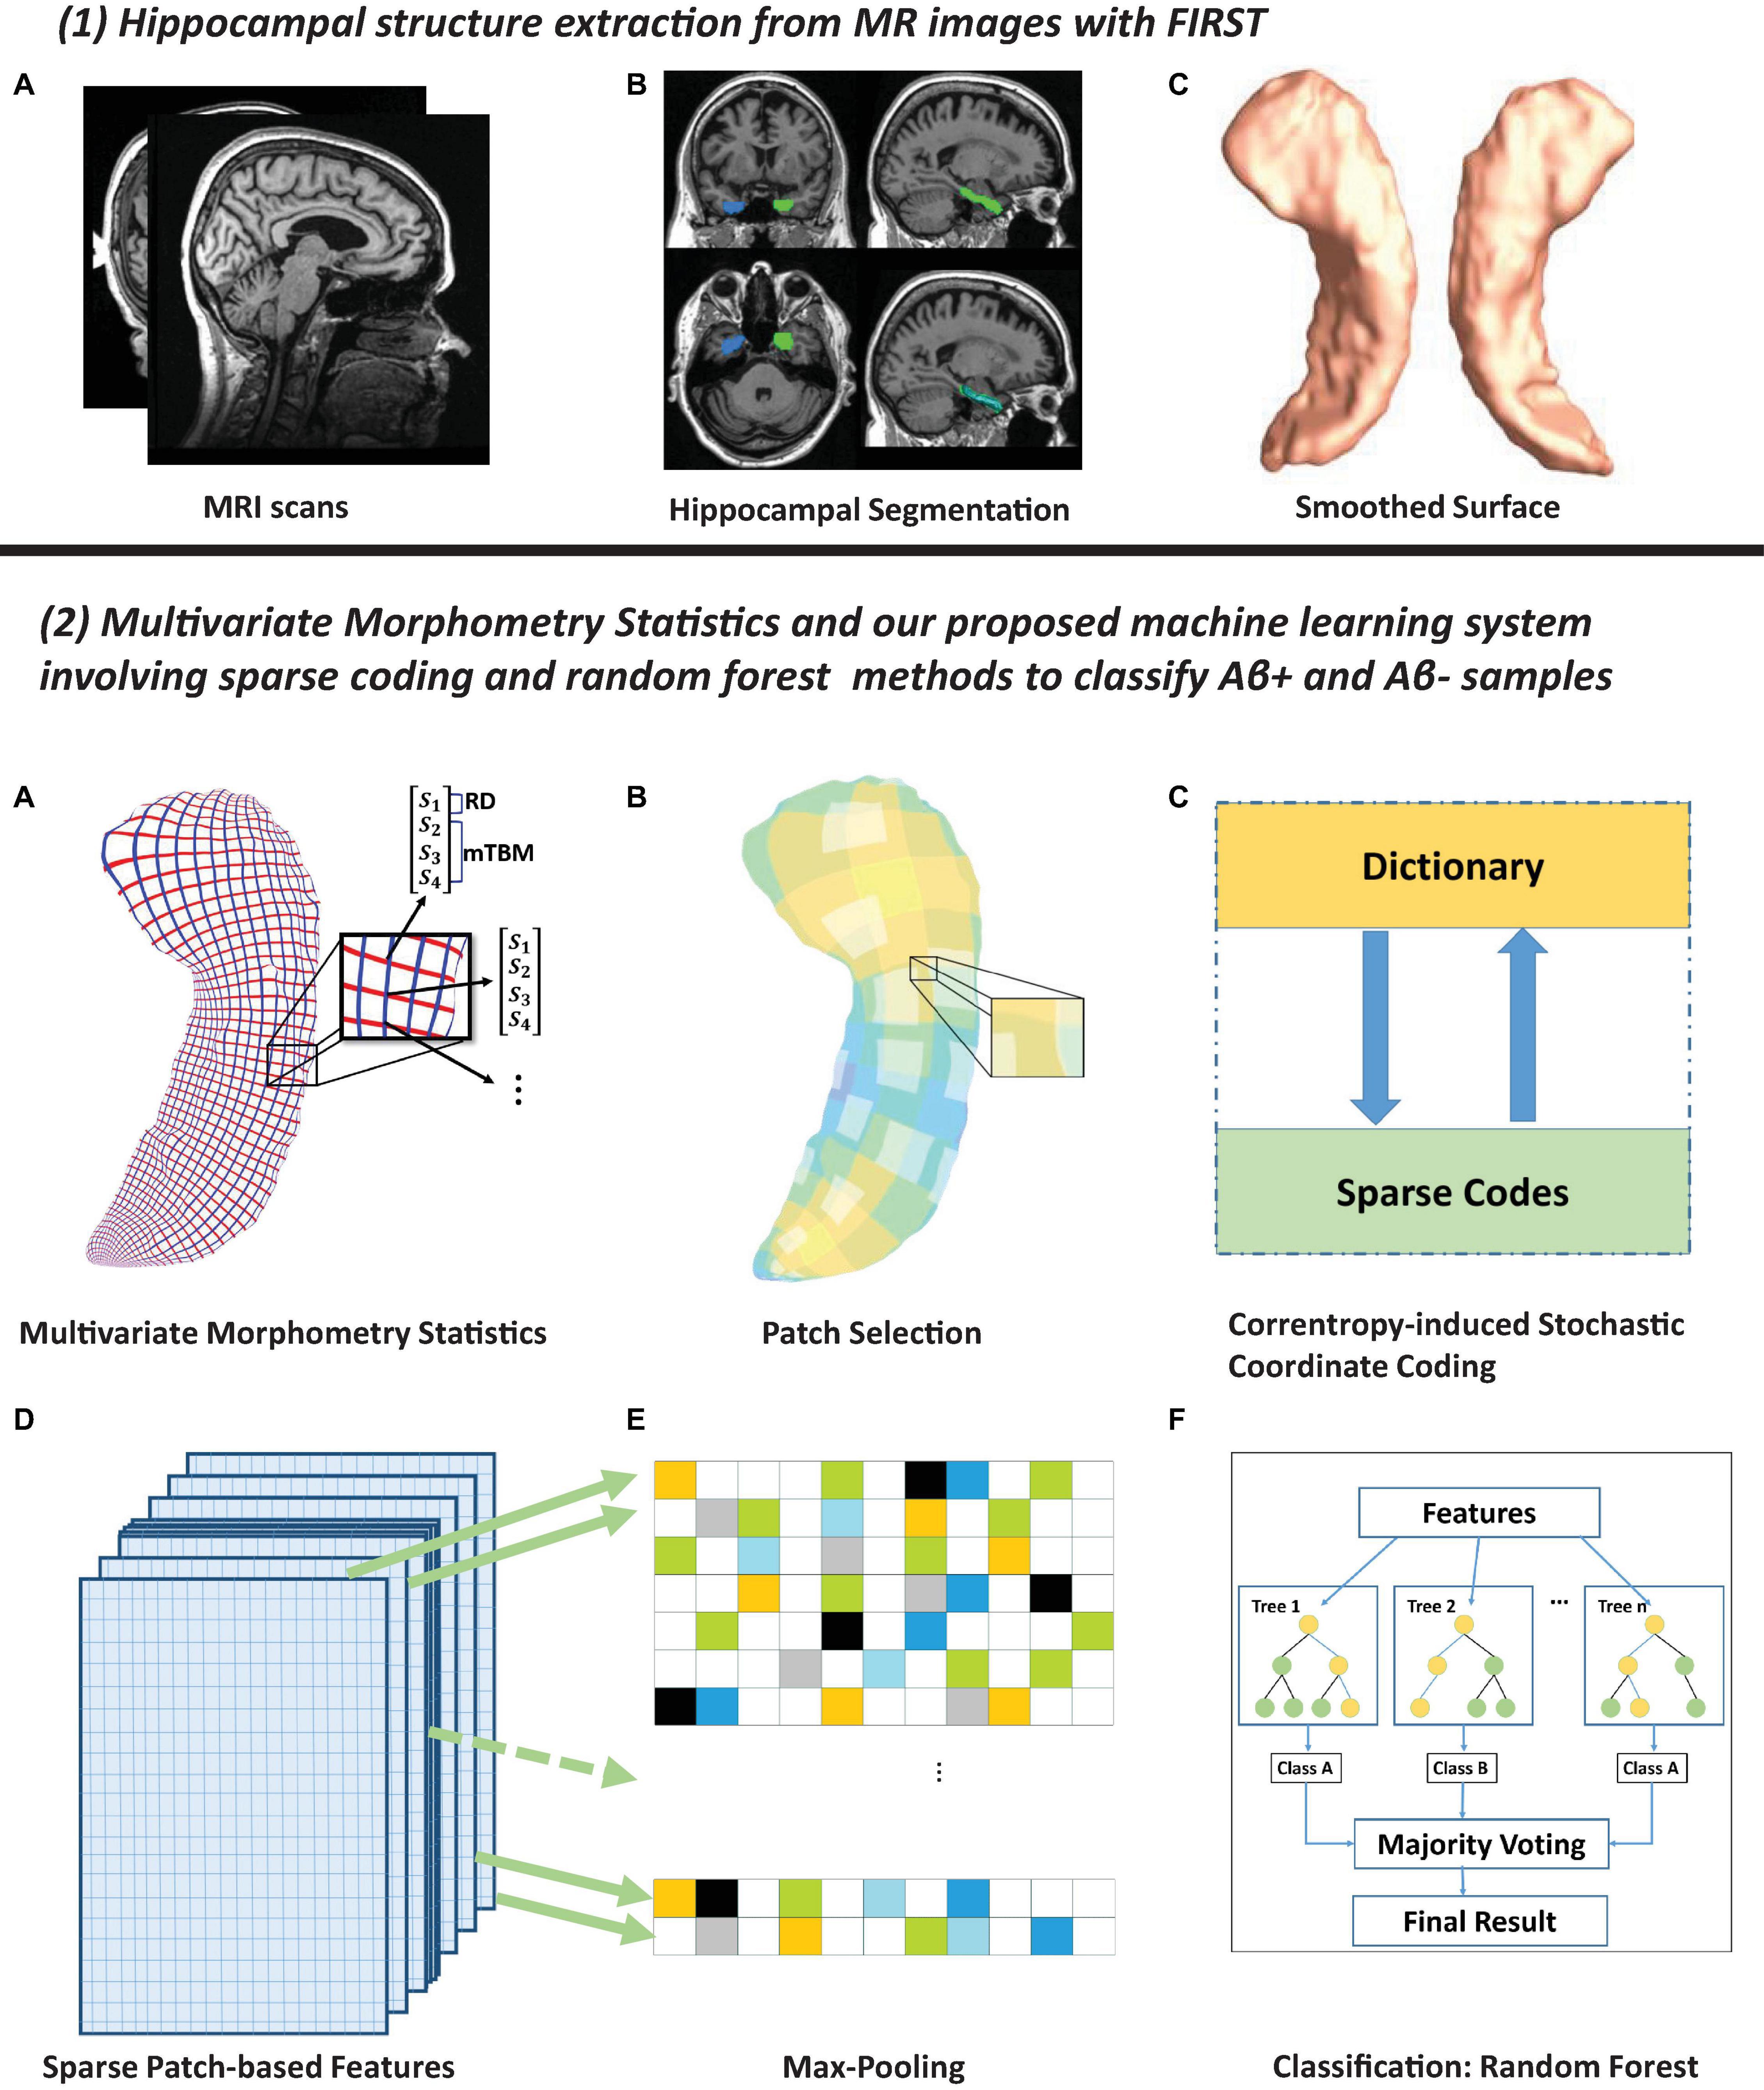 Frontiers Predicting Brain Amyloid Using Multivariate Morphometry Statistics, Sparse Coding, and Correntropy Validation in 1,101 Individuals From the ADNI and OASIS Databases